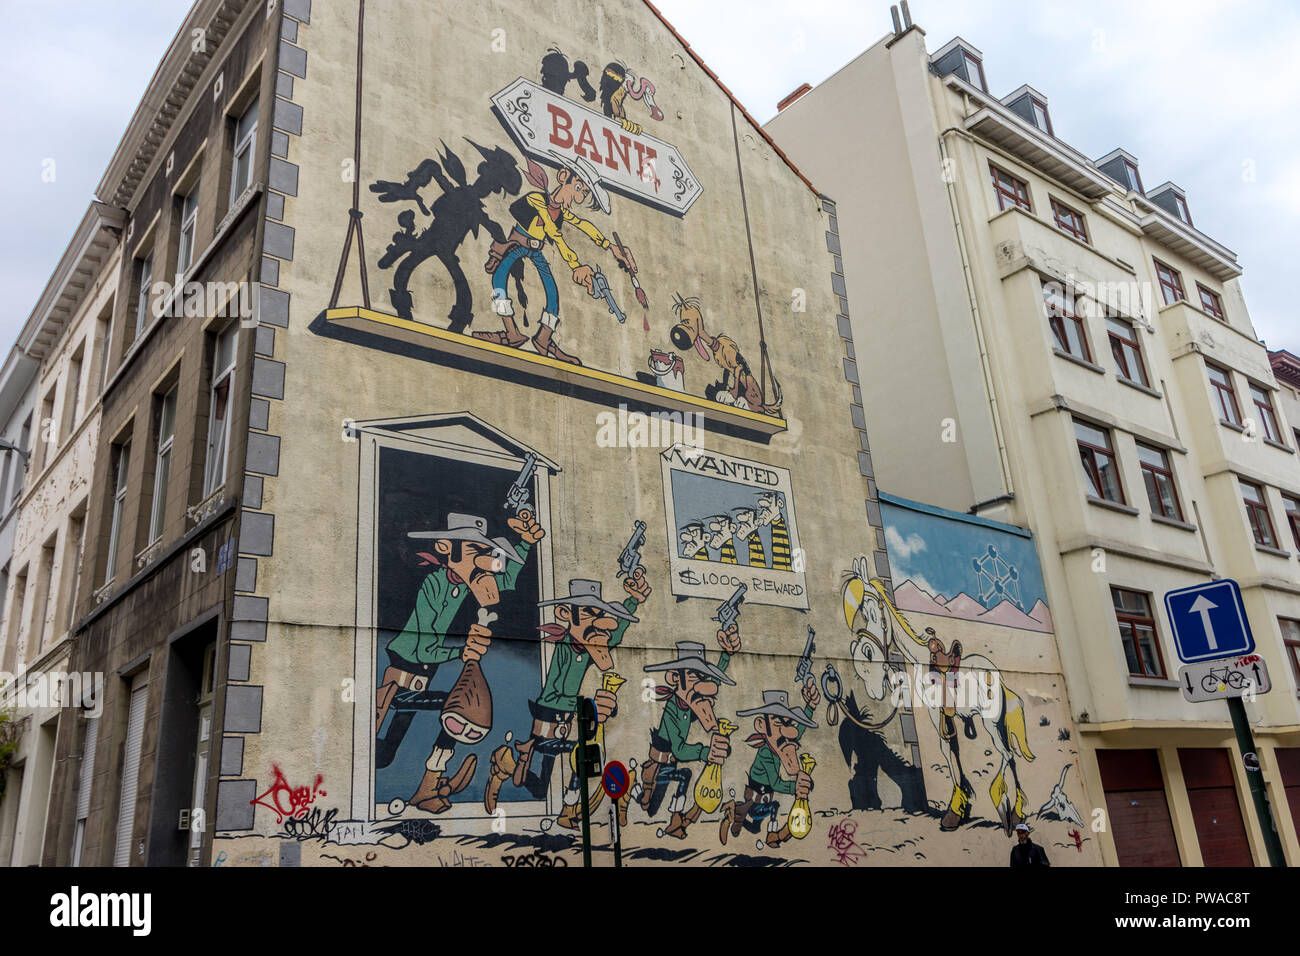 Brussels, Belgium - April 17 :  A fresco of an bank robbery on the walls of a building at Brussels, Belgium, Europe on april 17. Stock Photo